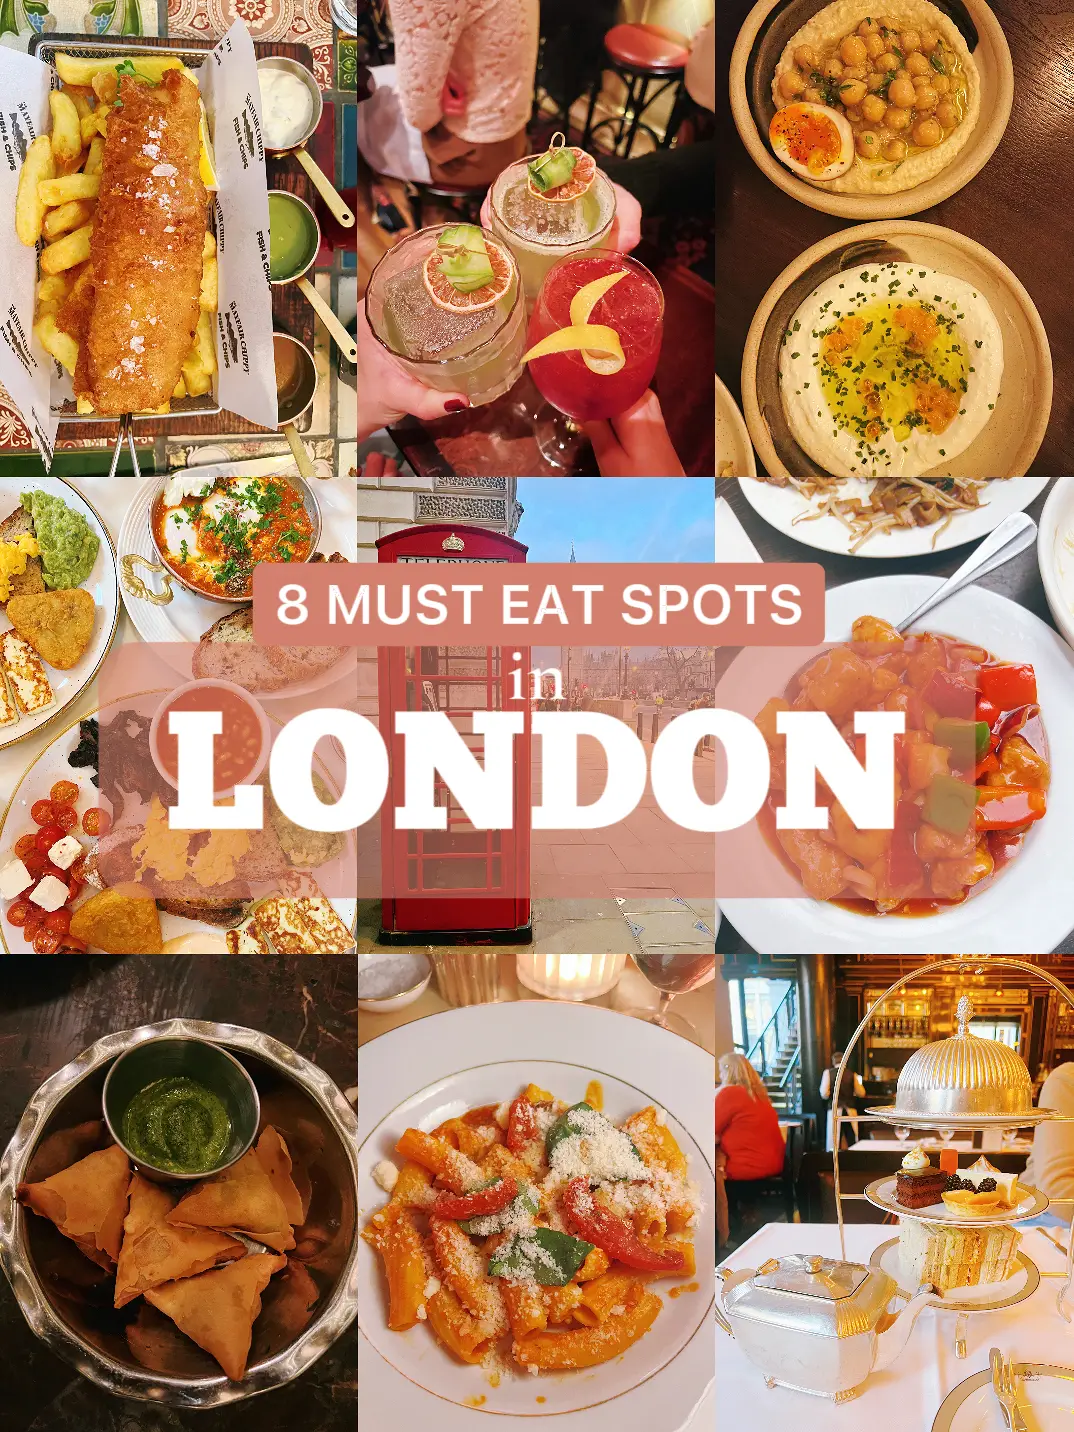 MUST-TRY Restaurants in London! 🇬🇧's images(0)